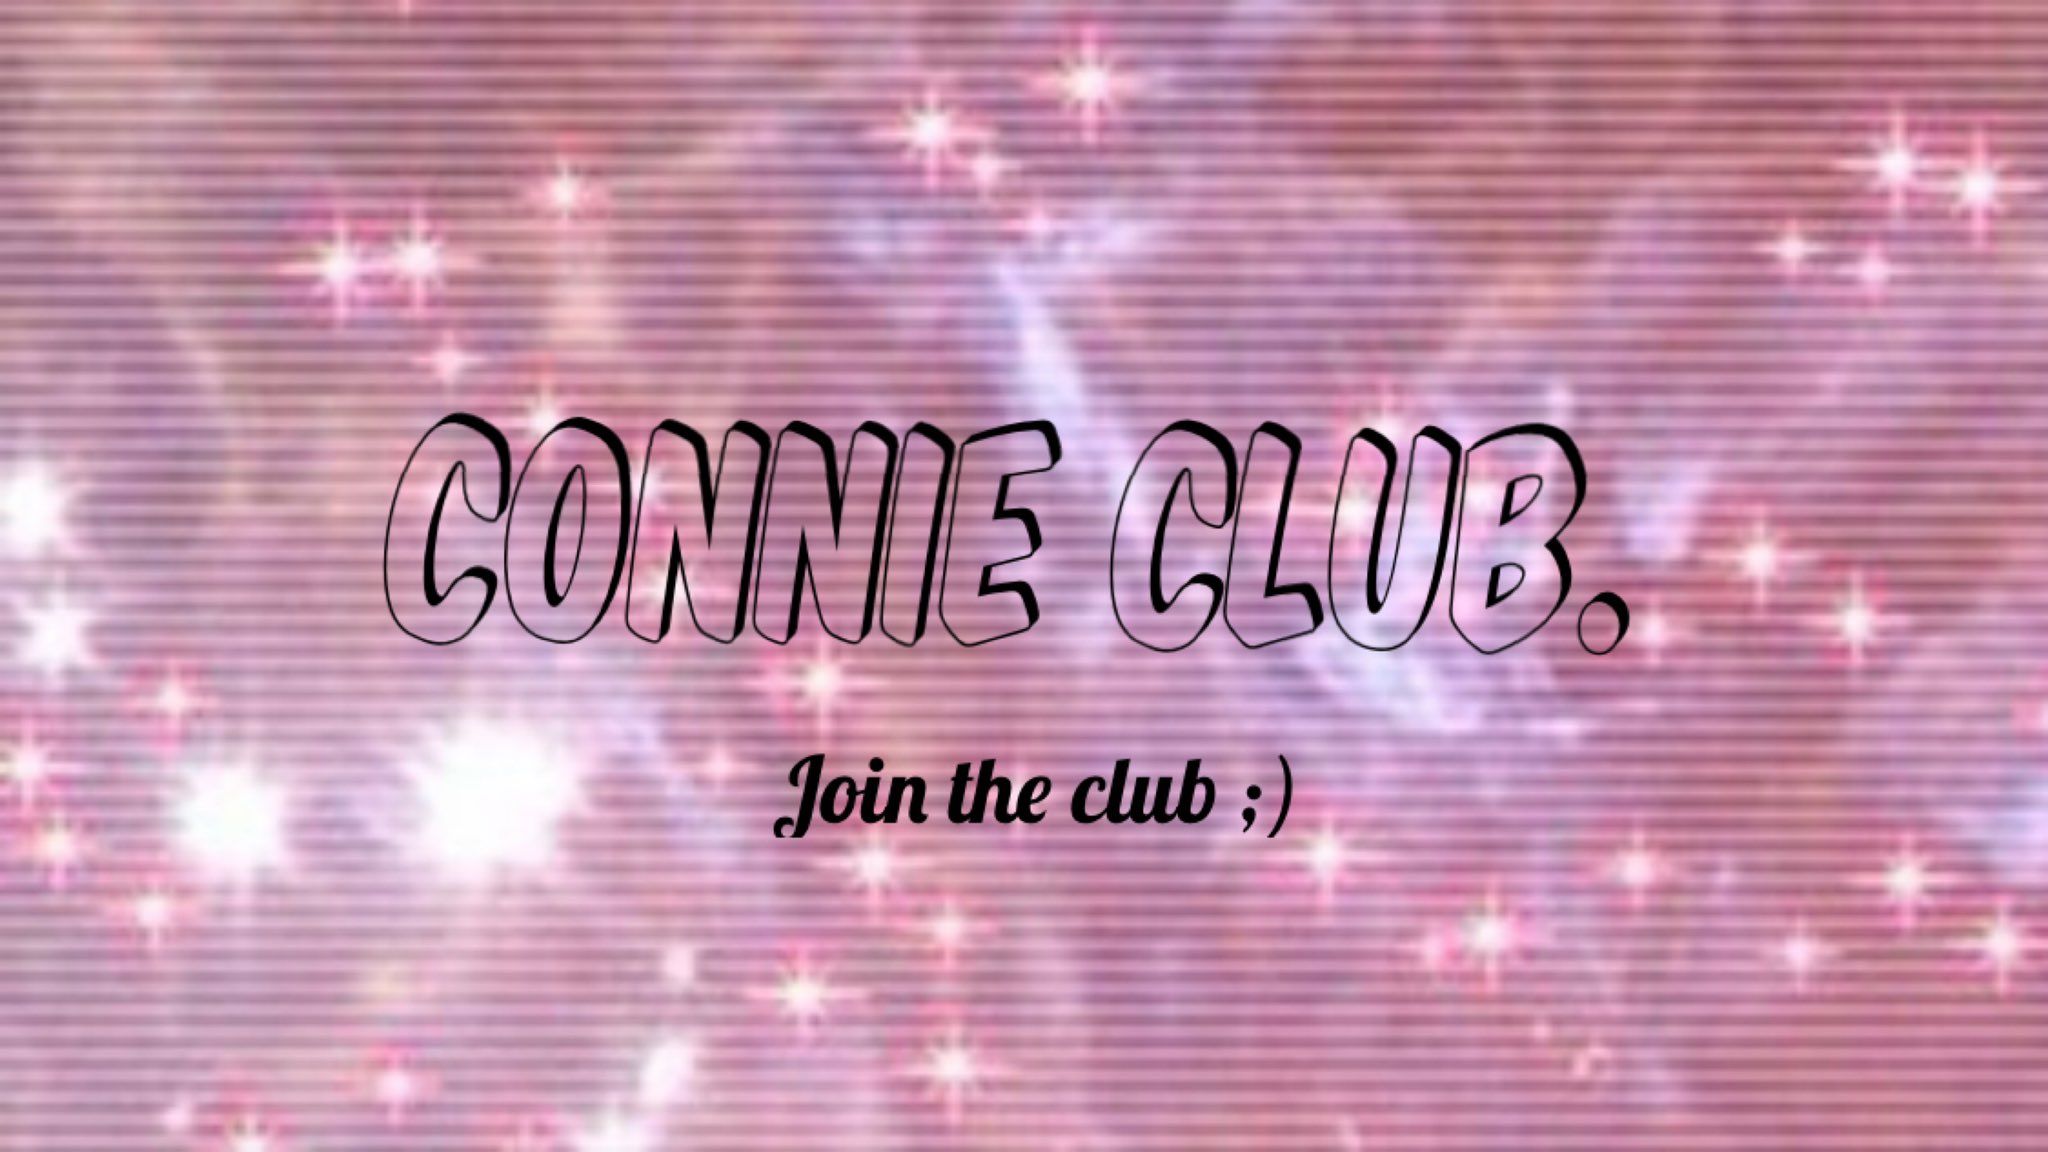 Connie.! I made this YouTube banner but I can't make it fit properly : if you guys want to get creative with this kind of idea, I would appreciate